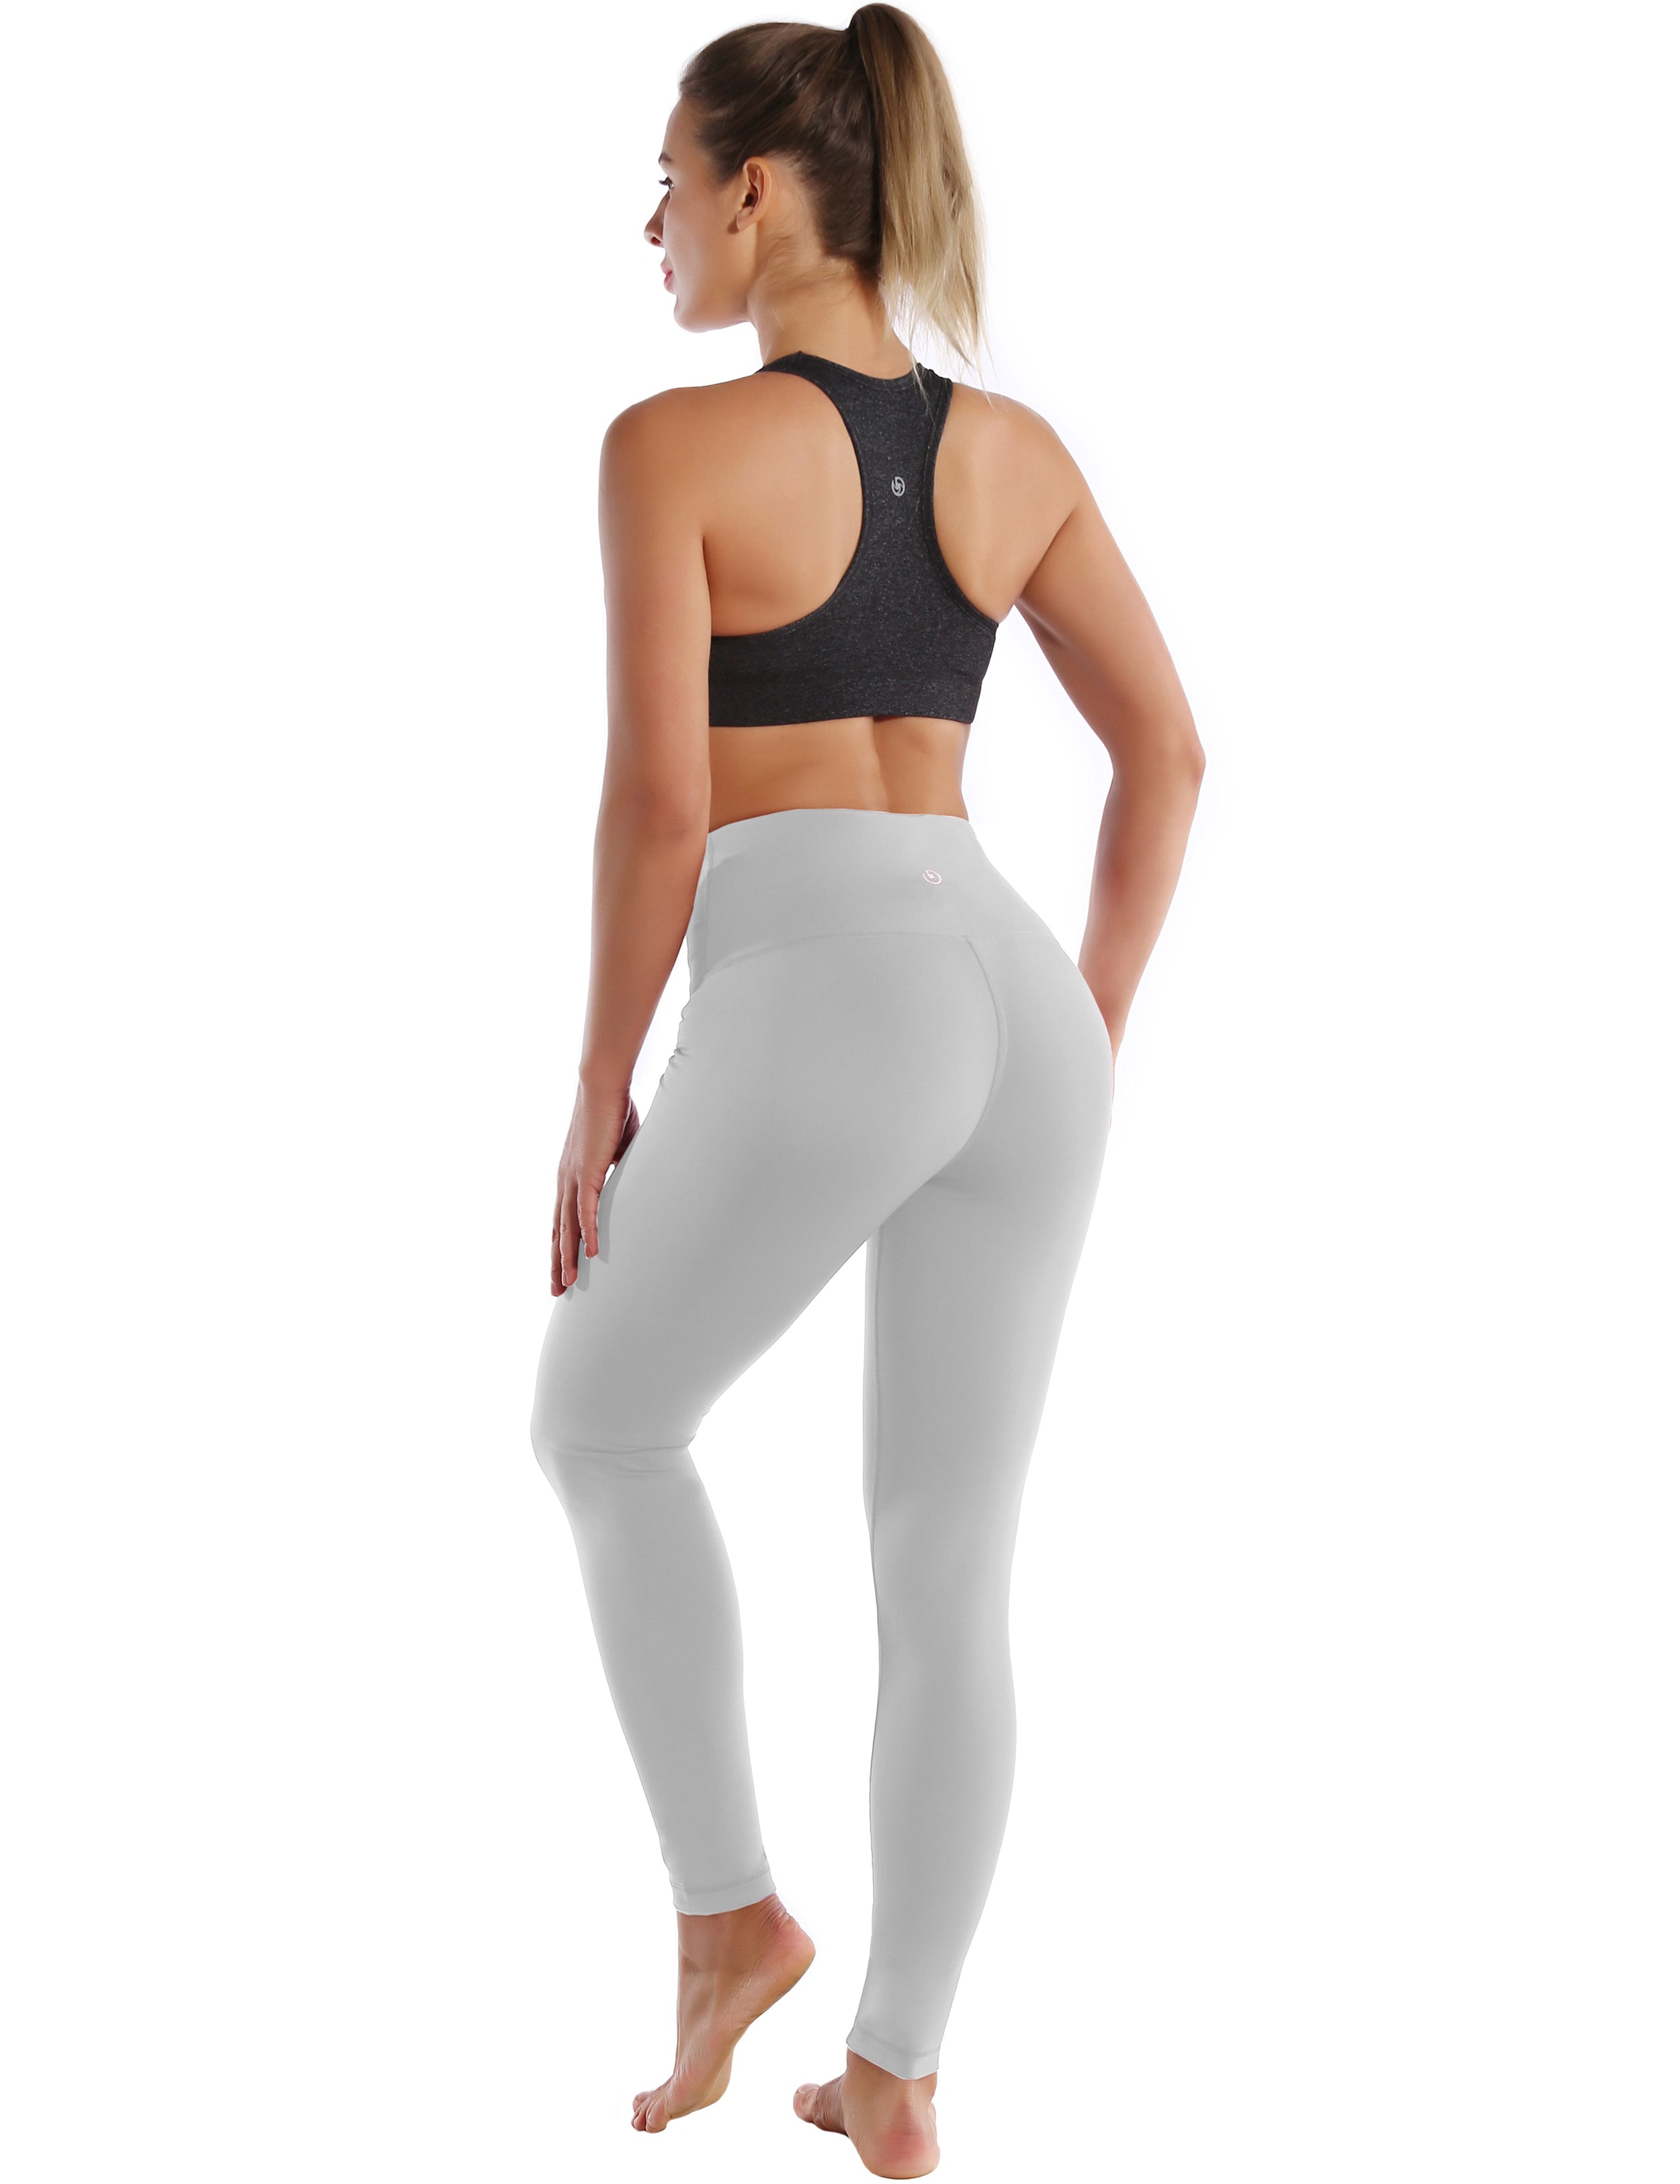 High Waist Gym Pants lightgray 75%Nylon/25%Spandex Fabric doesn't attract lint easily 4-way stretch No see-through Moisture-wicking Tummy control Inner pocket Four lengths